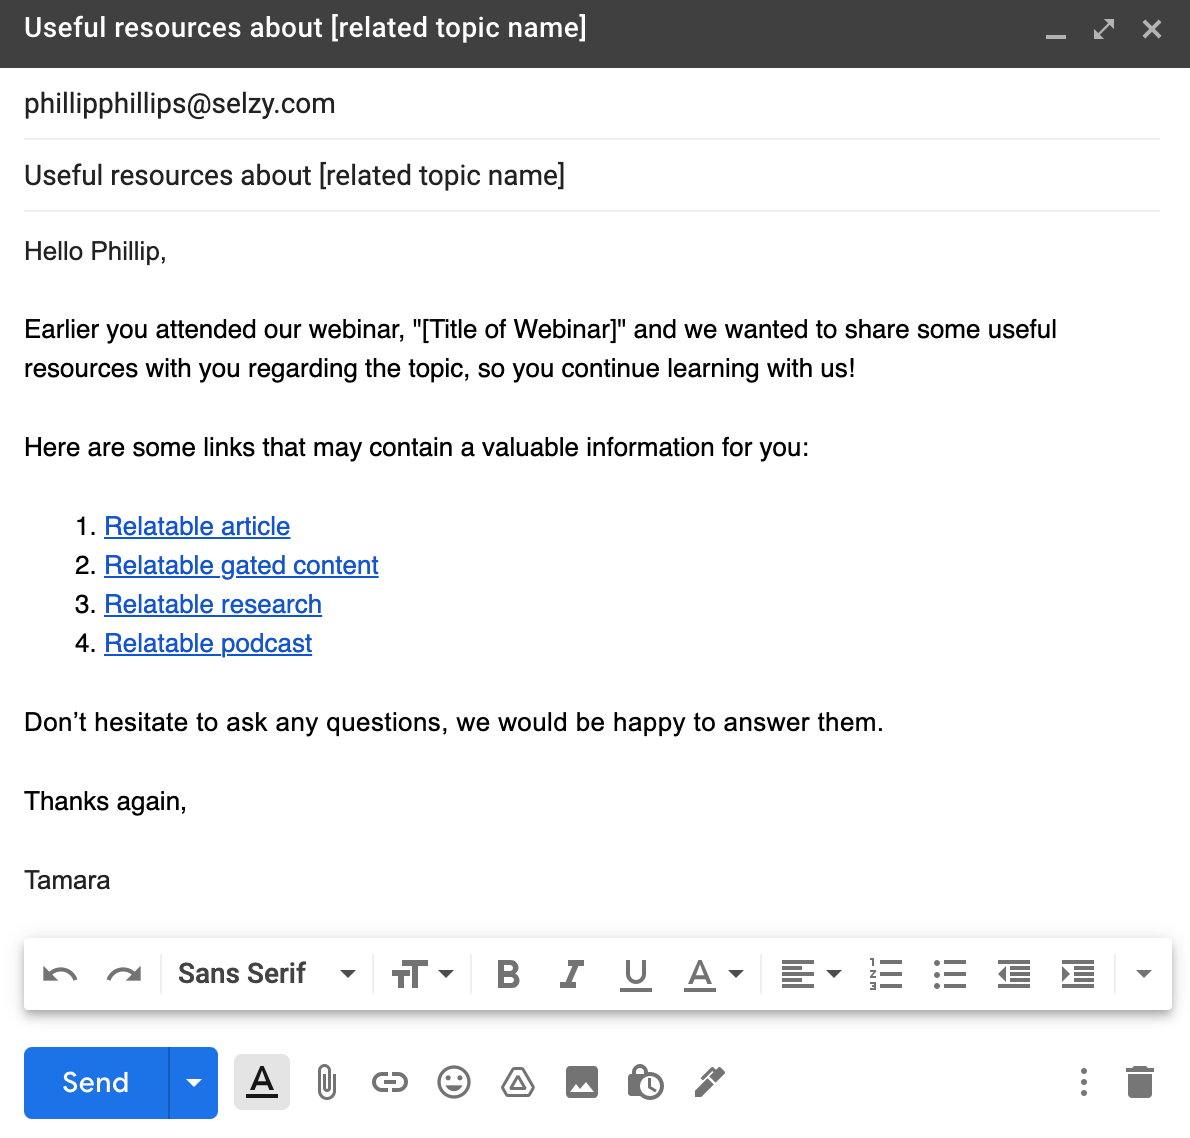 Second follow-up email with additional resources